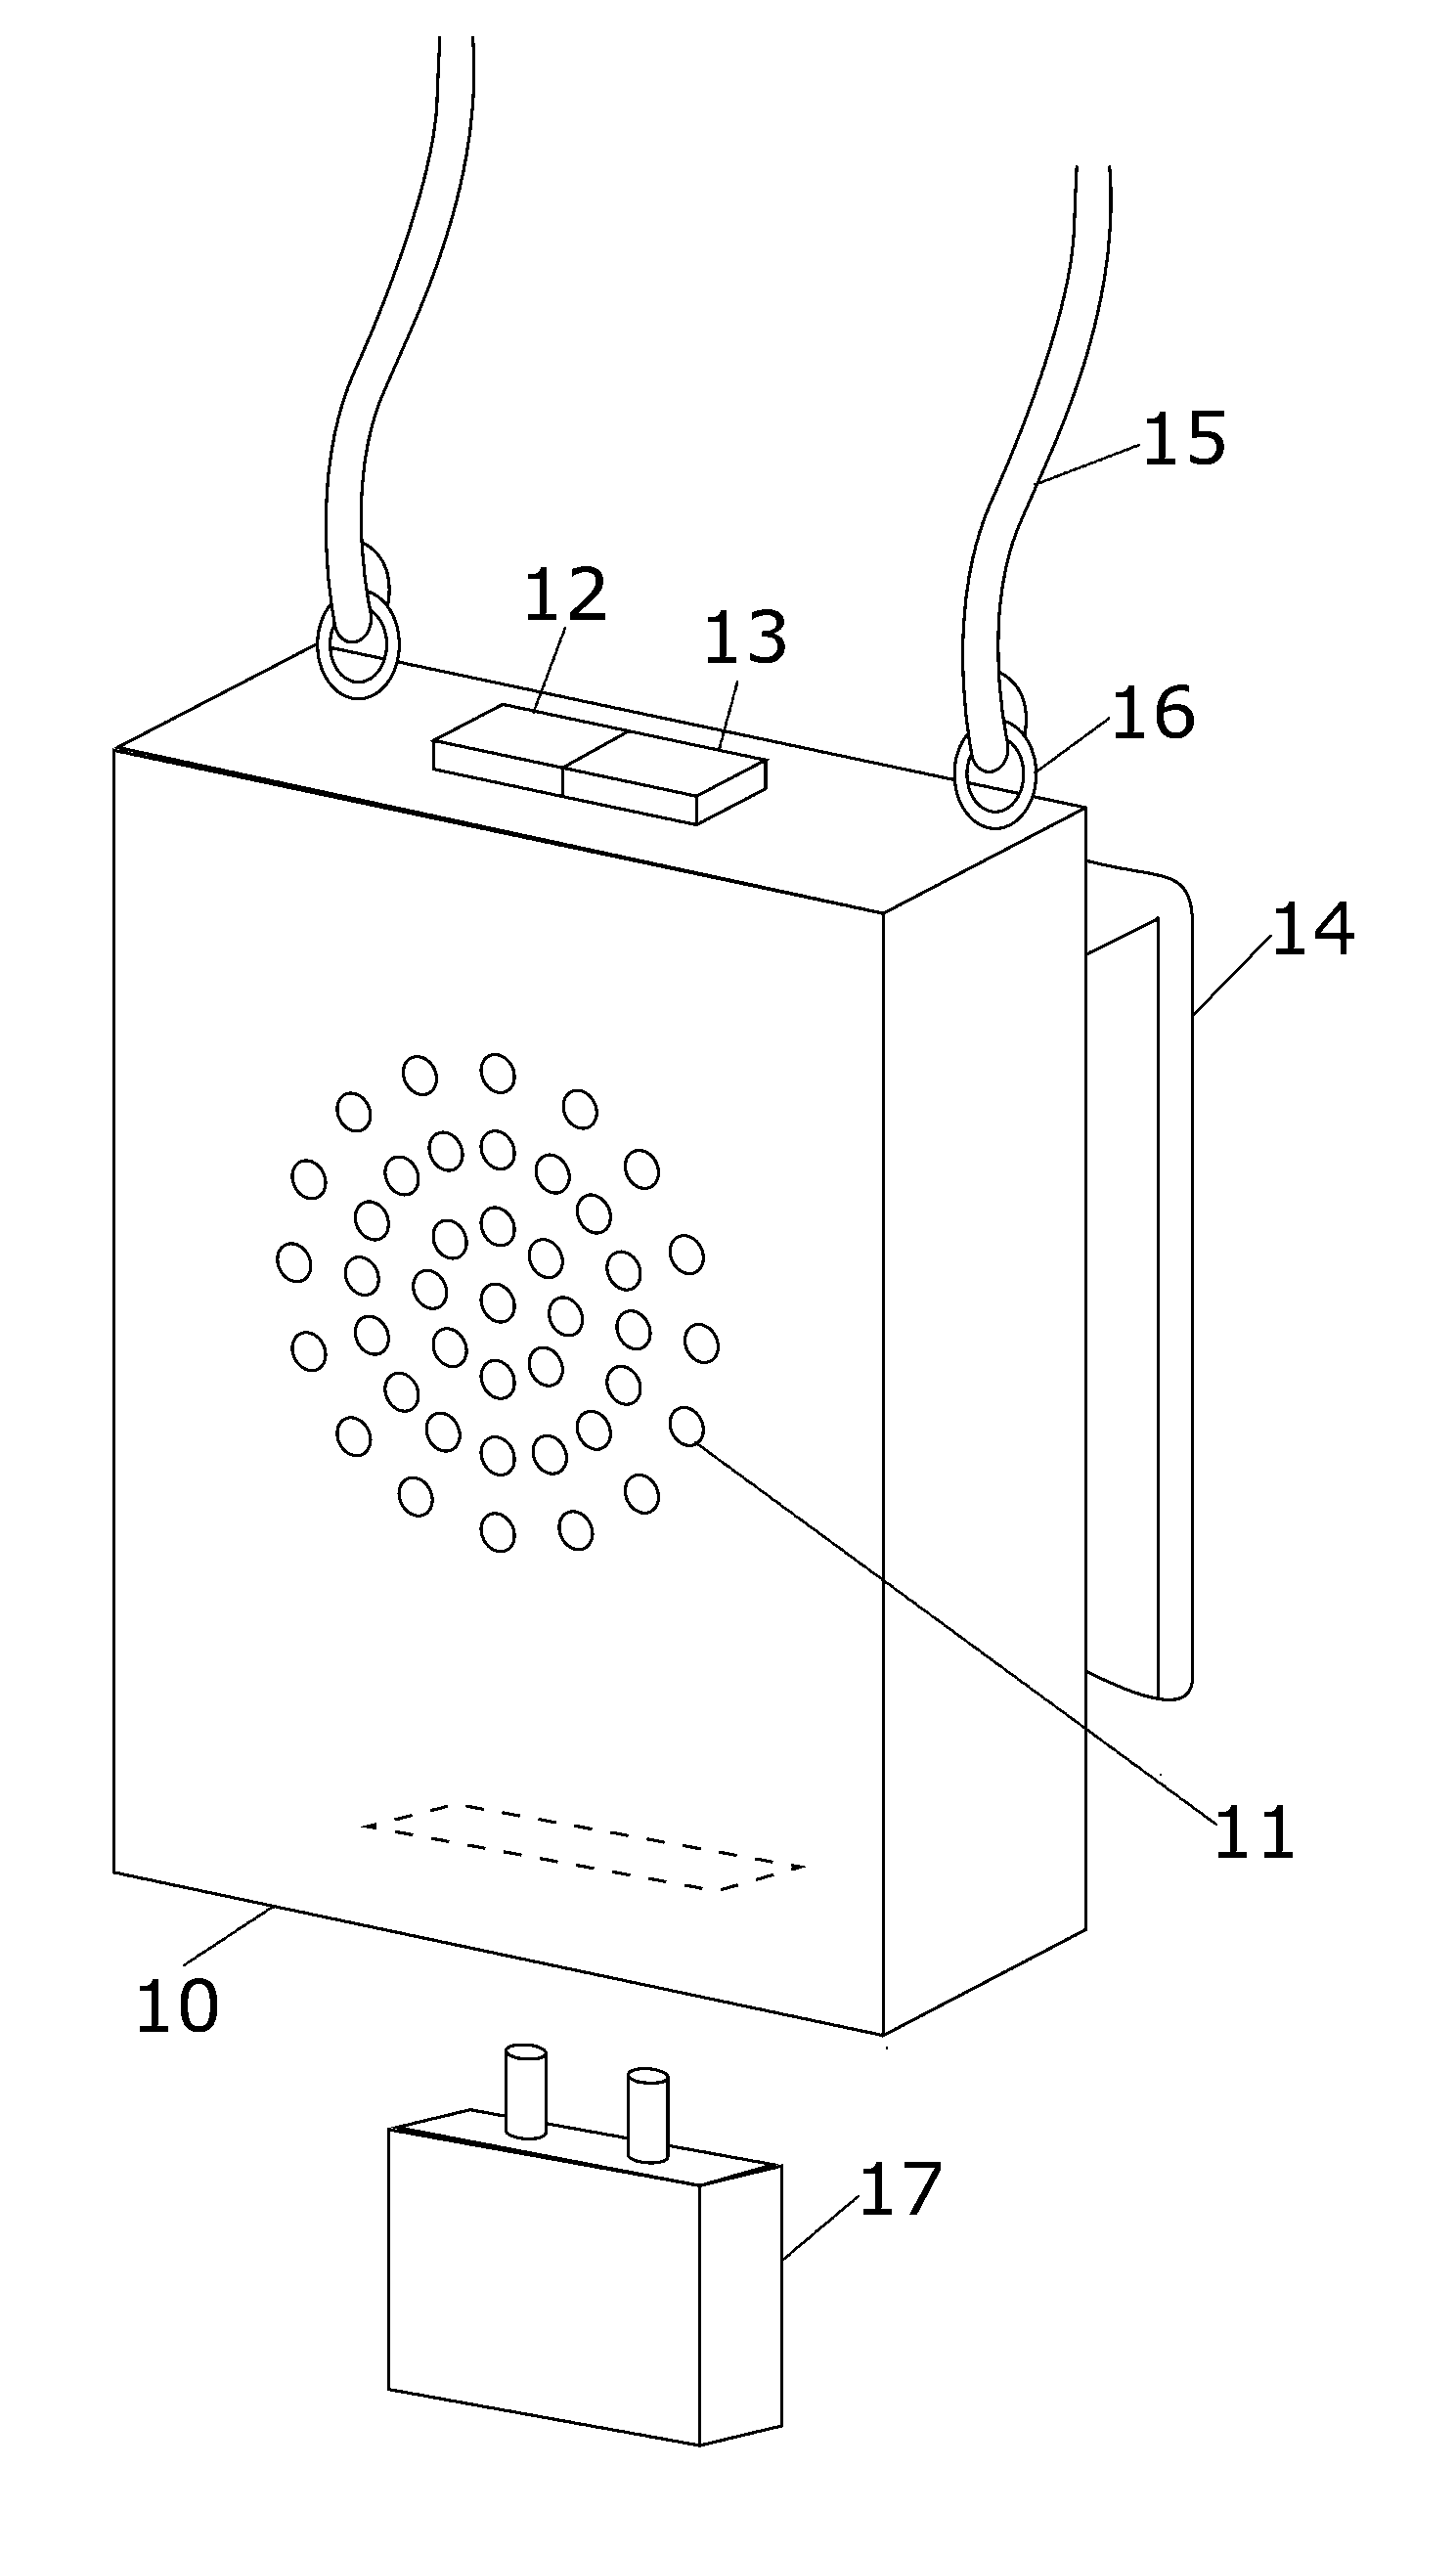 Electronic self-protection and emergency beacon device for wilderness use